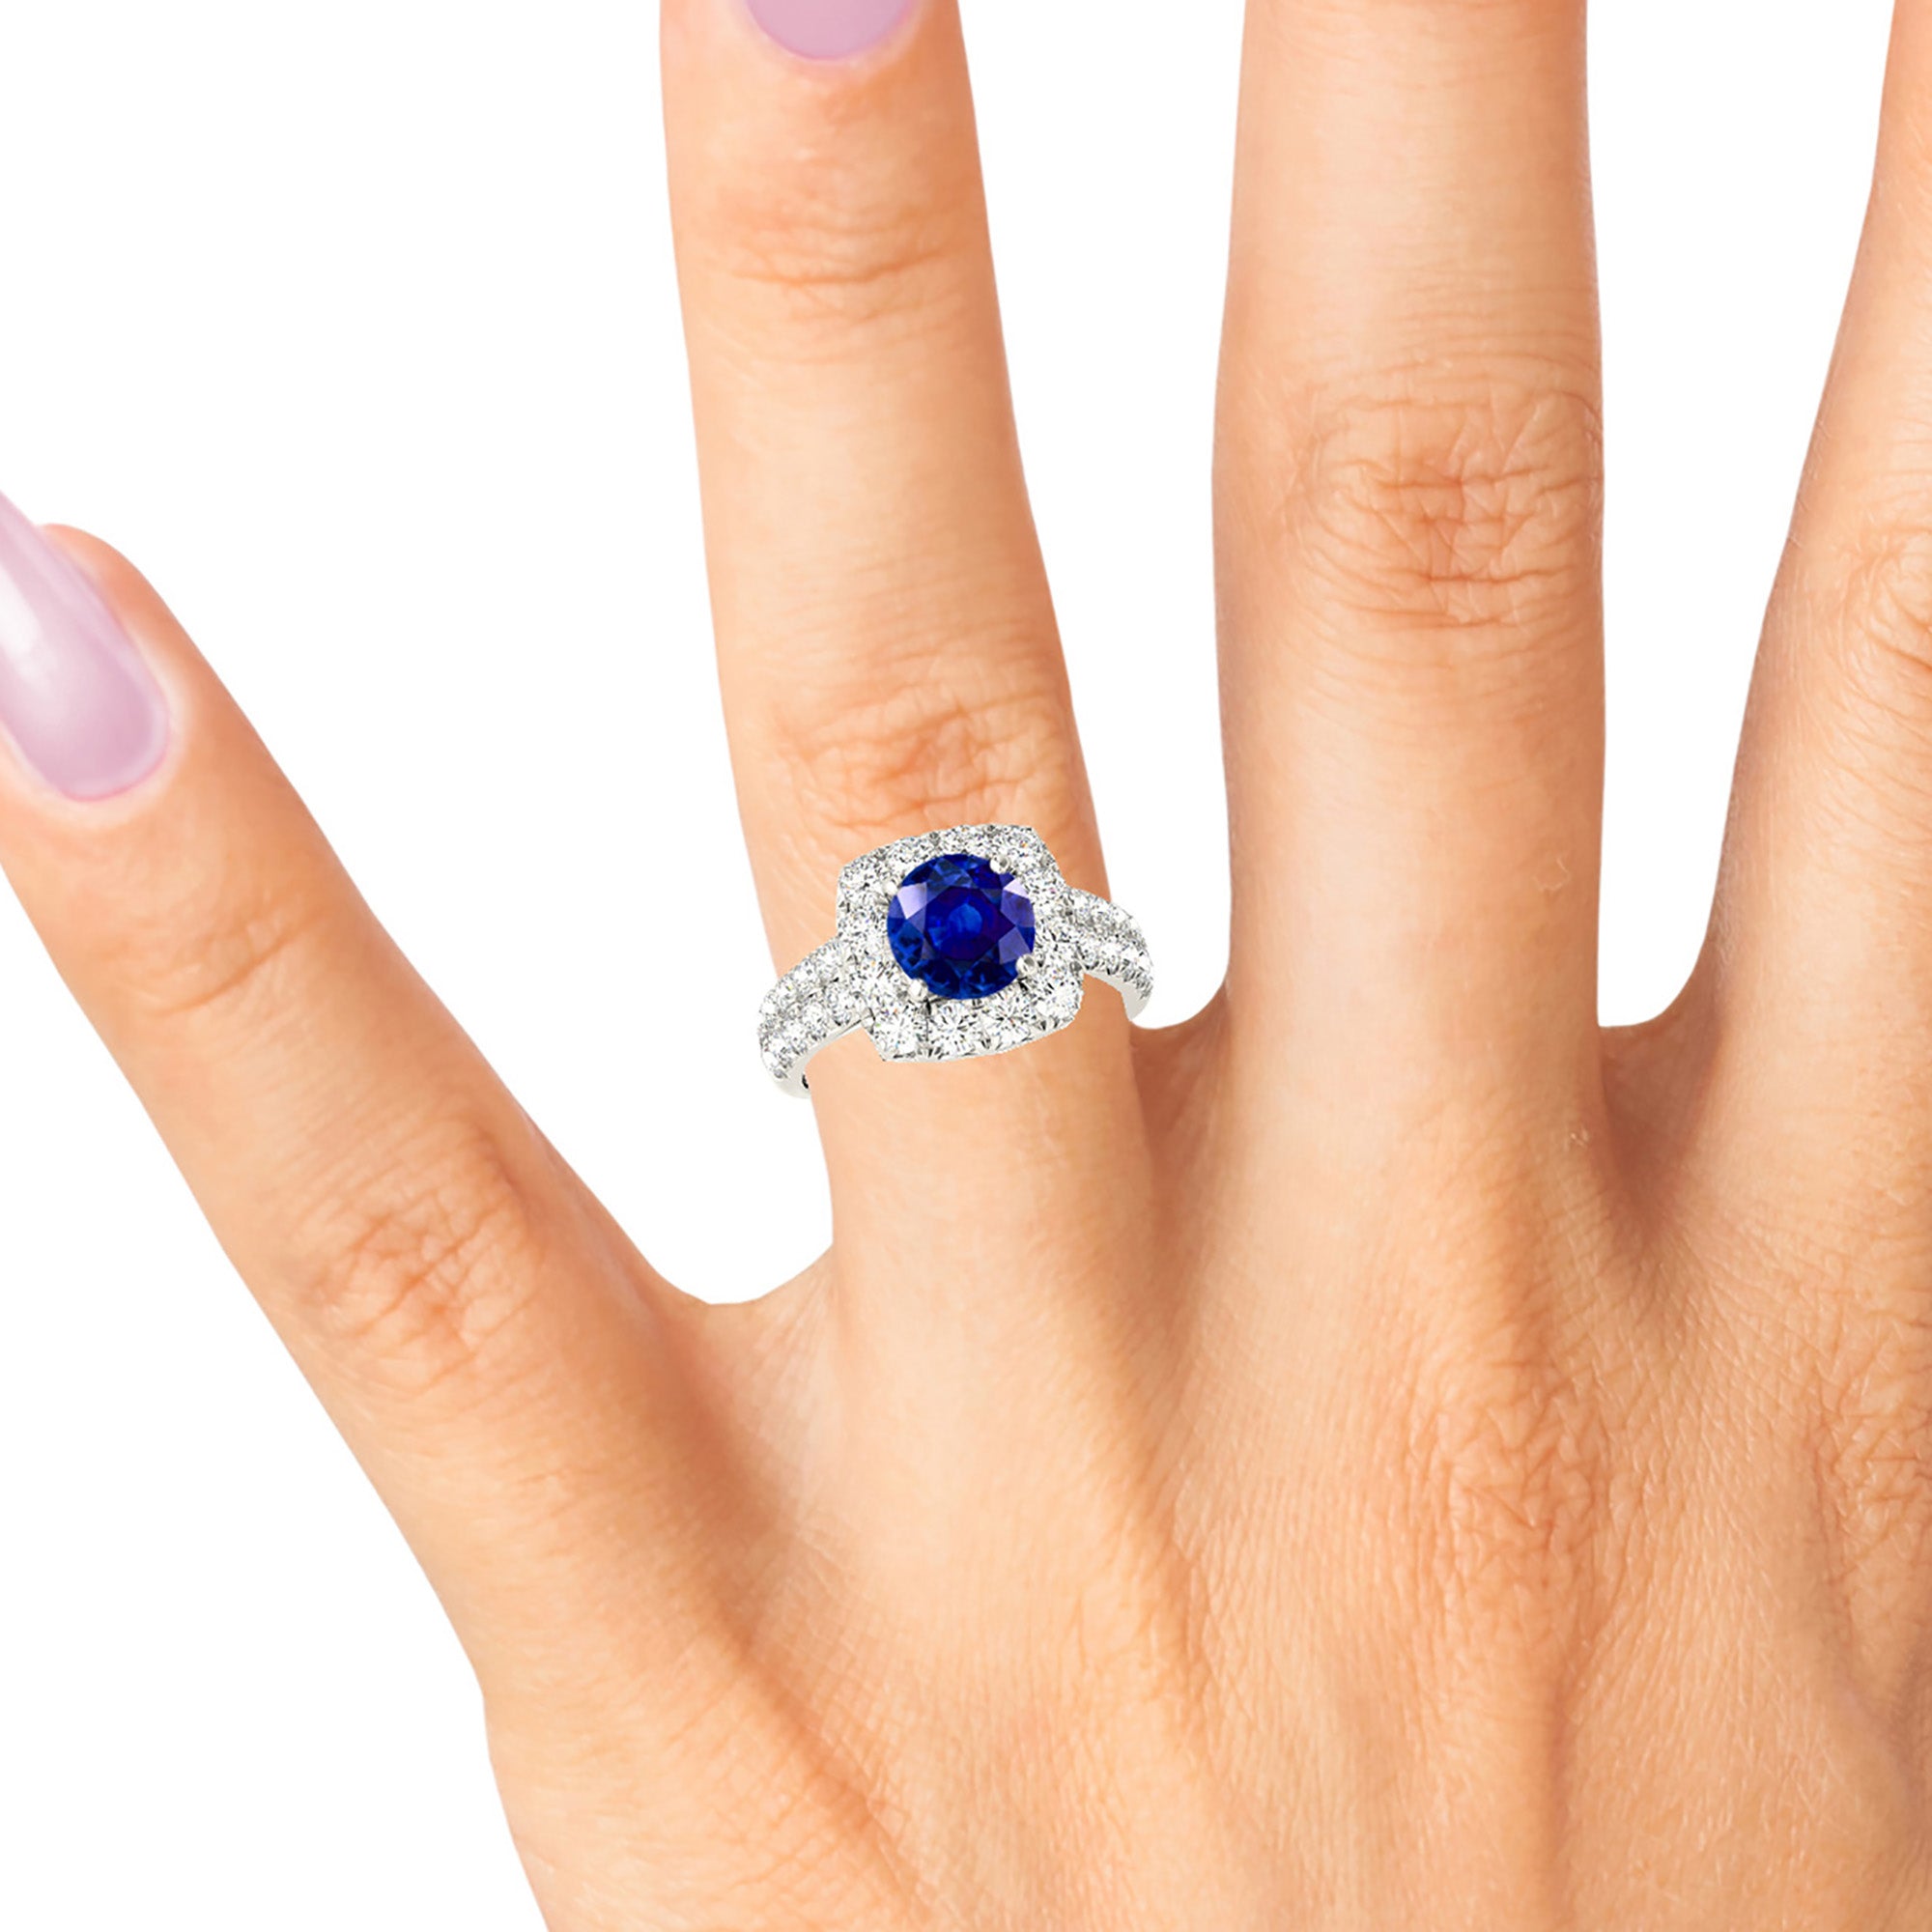 2.41 ct. Genuine Blue Sapphire Halo Ring with 1.00 ctw. Side Diamonds Double Row-in 14K/18K White, Yellow, Rose Gold and Platinum - Christmas Jewelry Gift -VIRABYANI